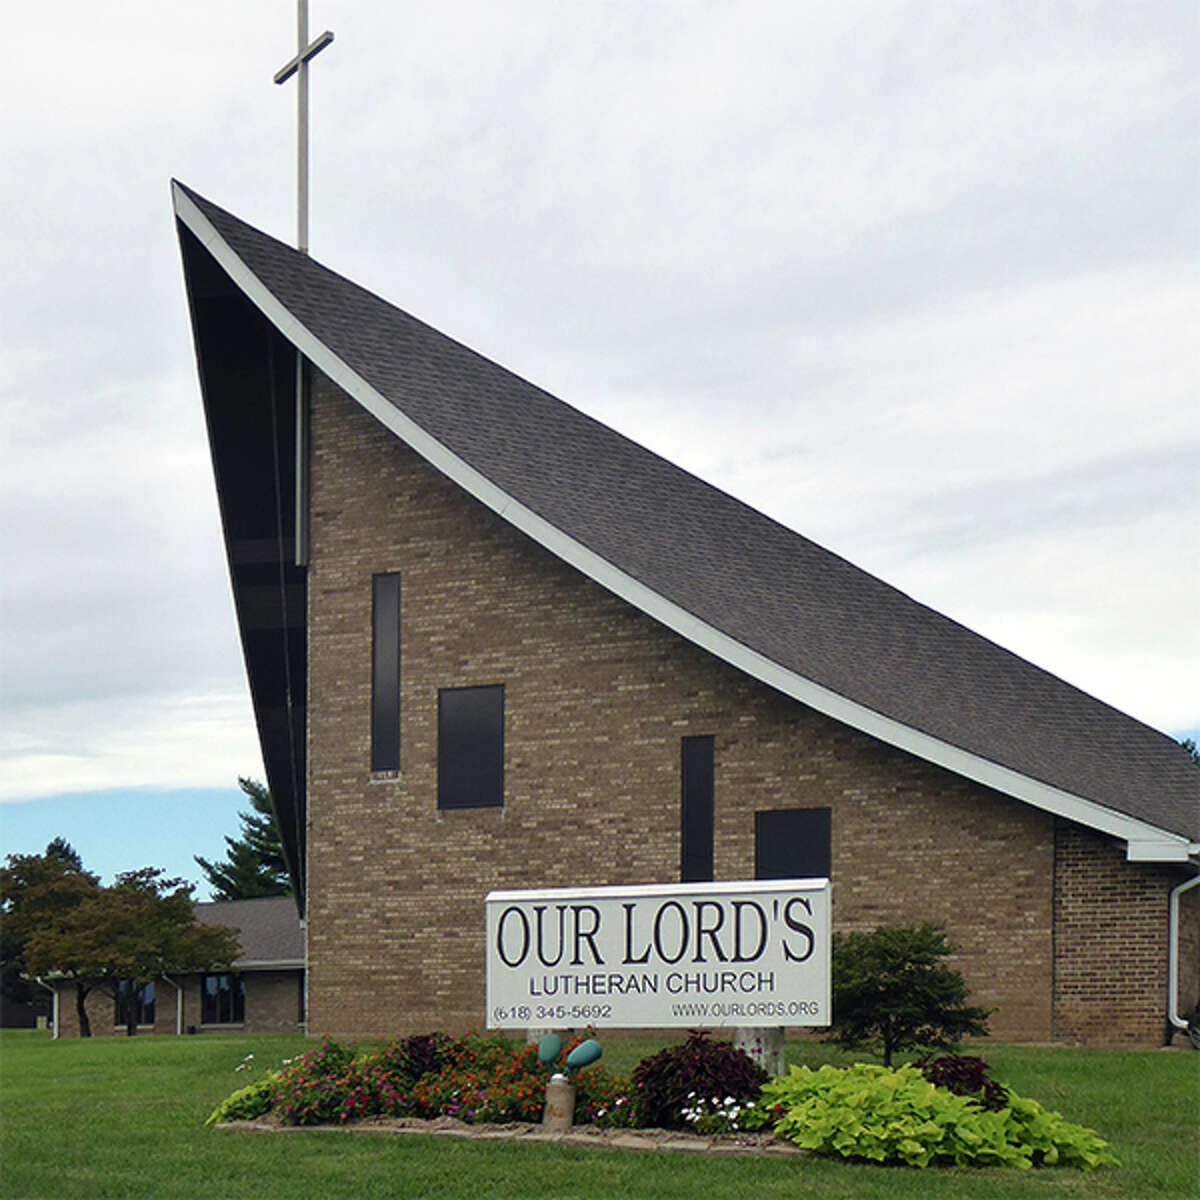 Our Lord’s Lutheran Church at 150 Wilma Drive in Maryville will offer a drive-through option for the imposition of ashes on Wednesday, March 2.